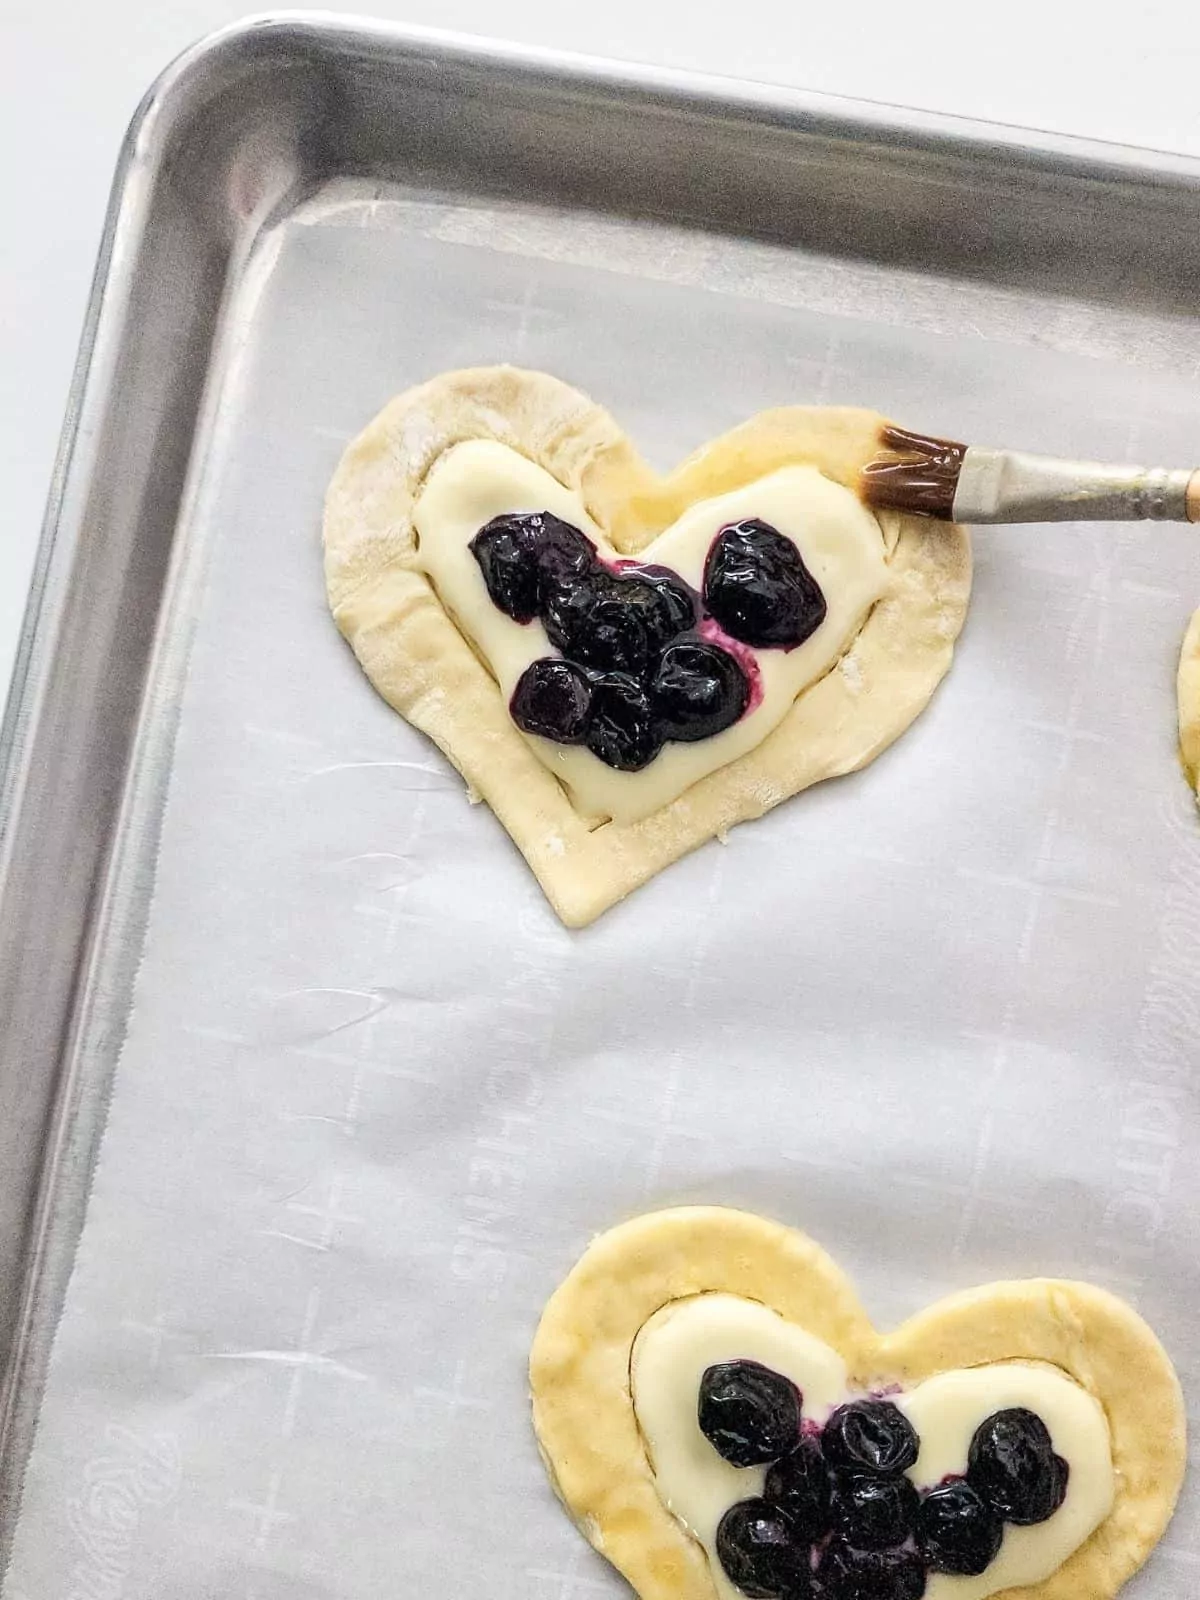 Brushing egg wash on puff pastry danish in shape of hearts.